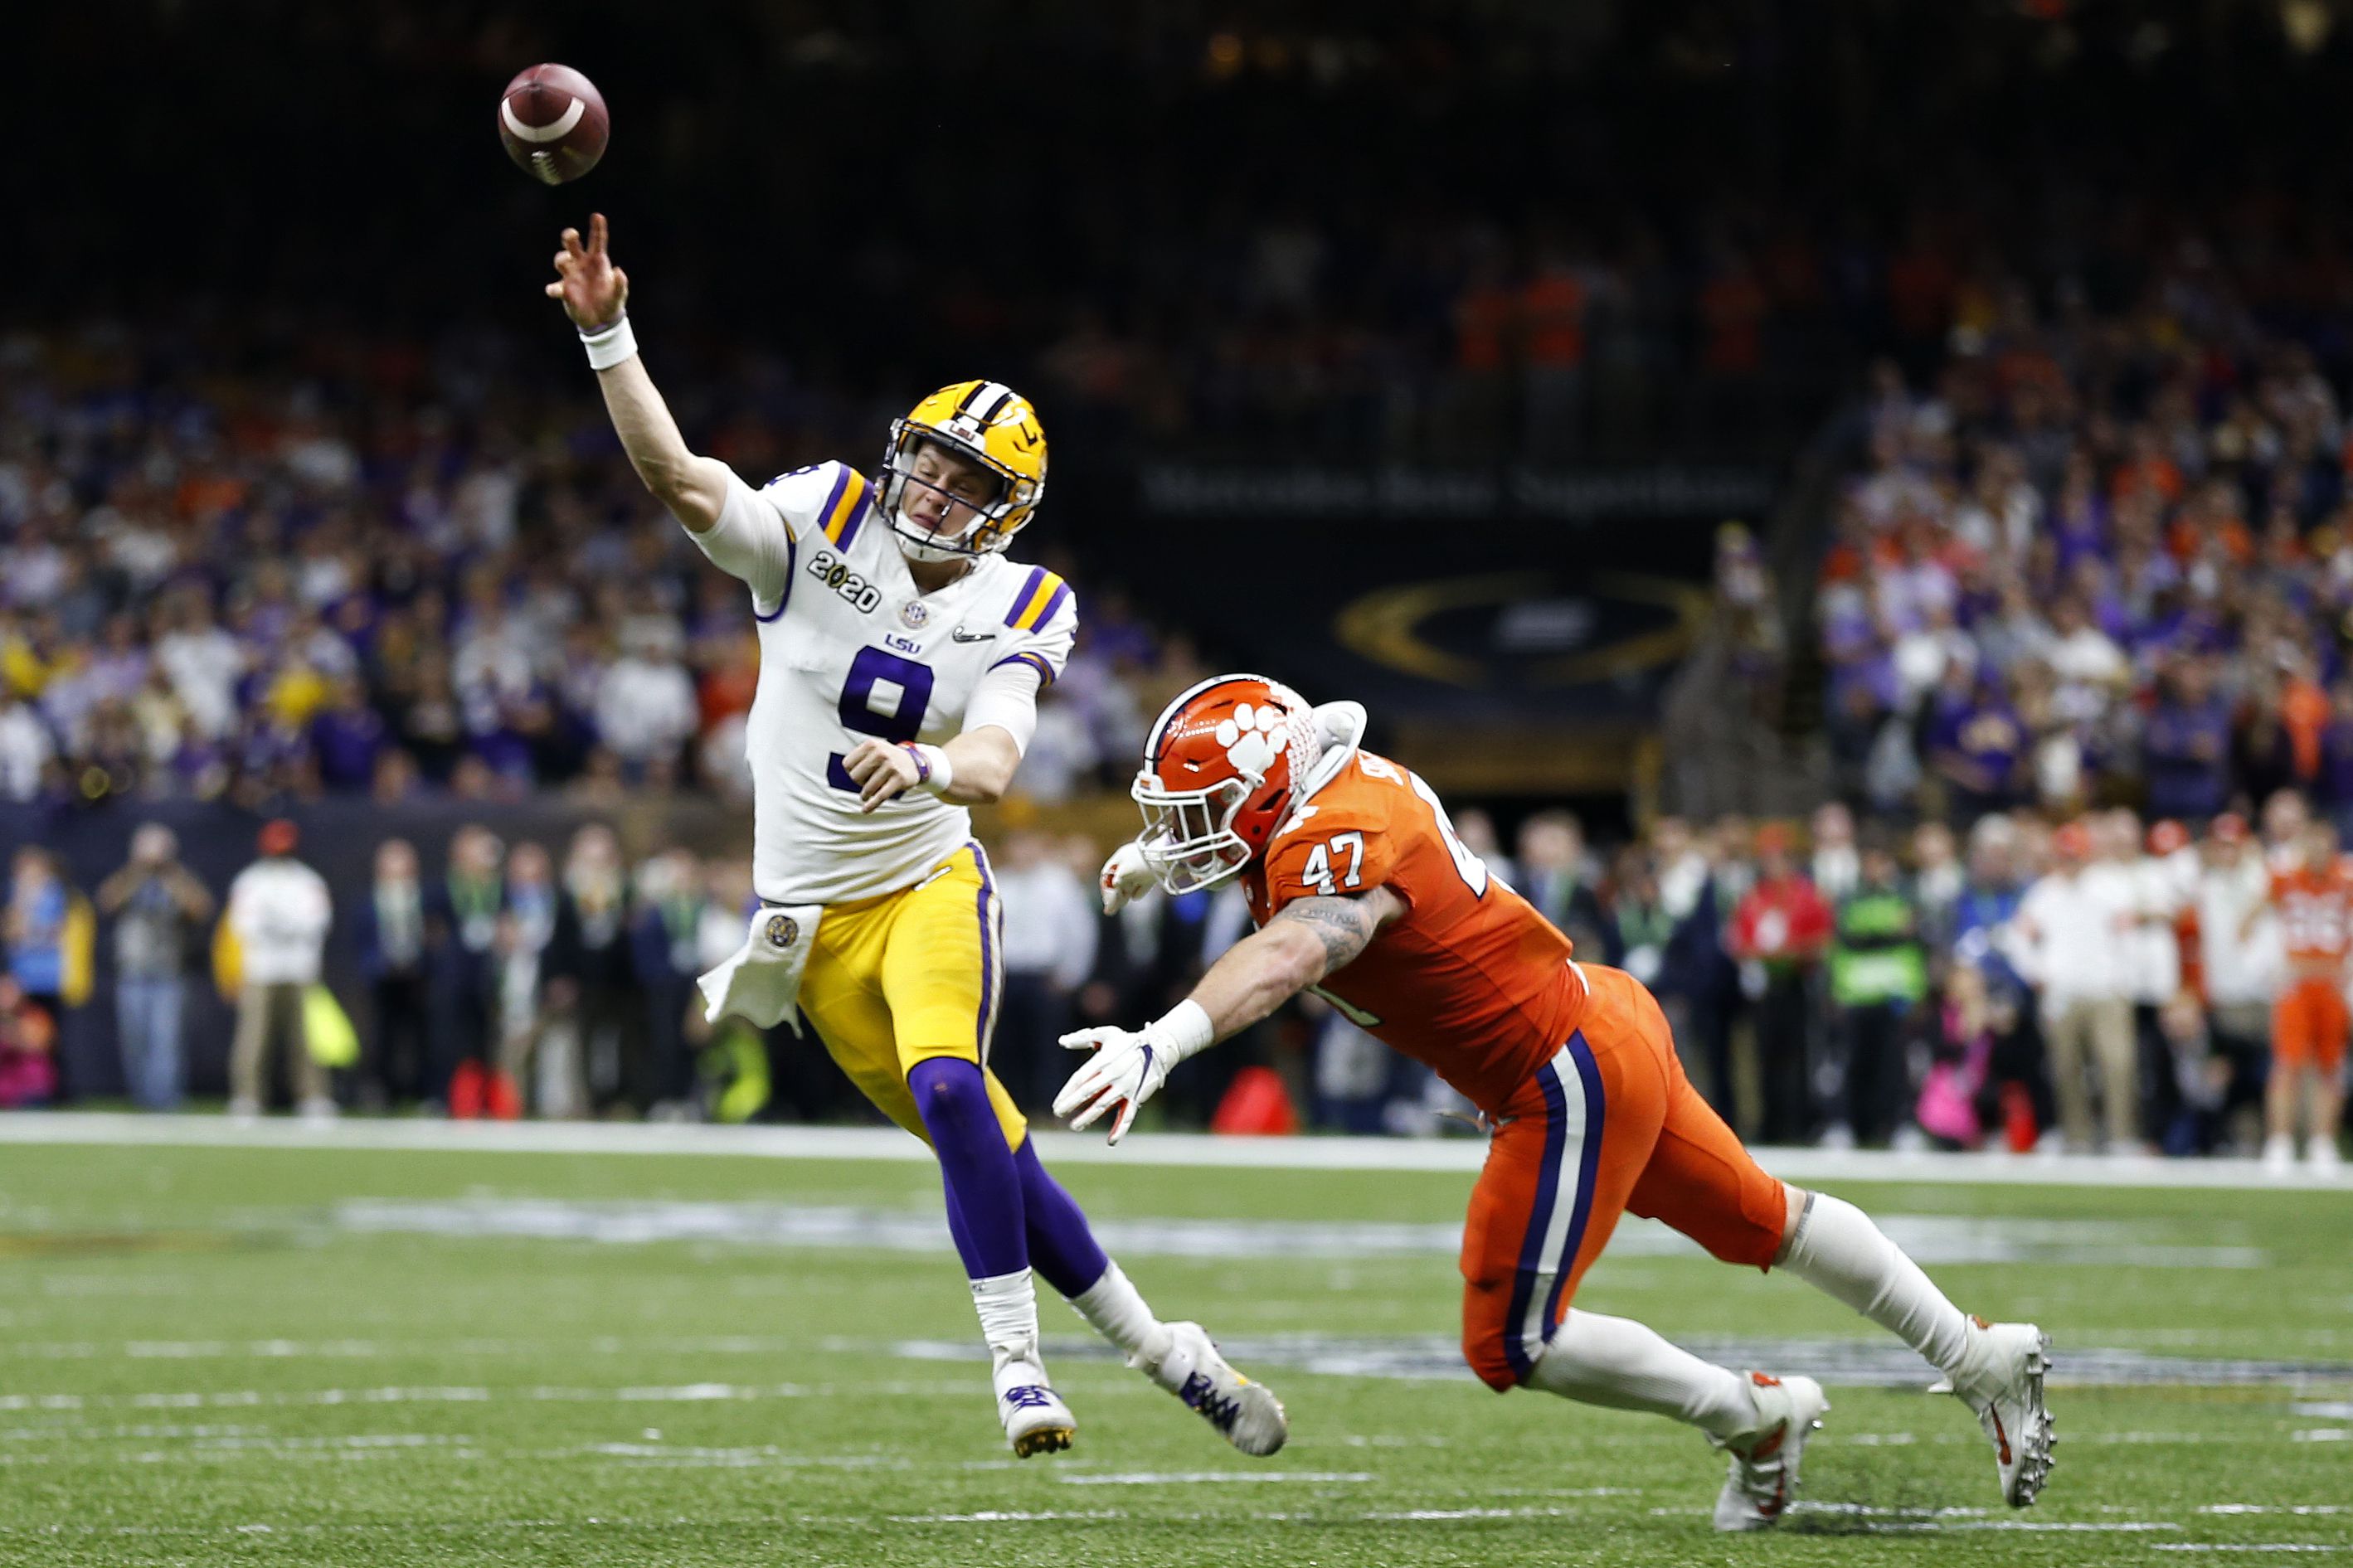 Letters to the editor: Joe Burrow is smart on and off the field